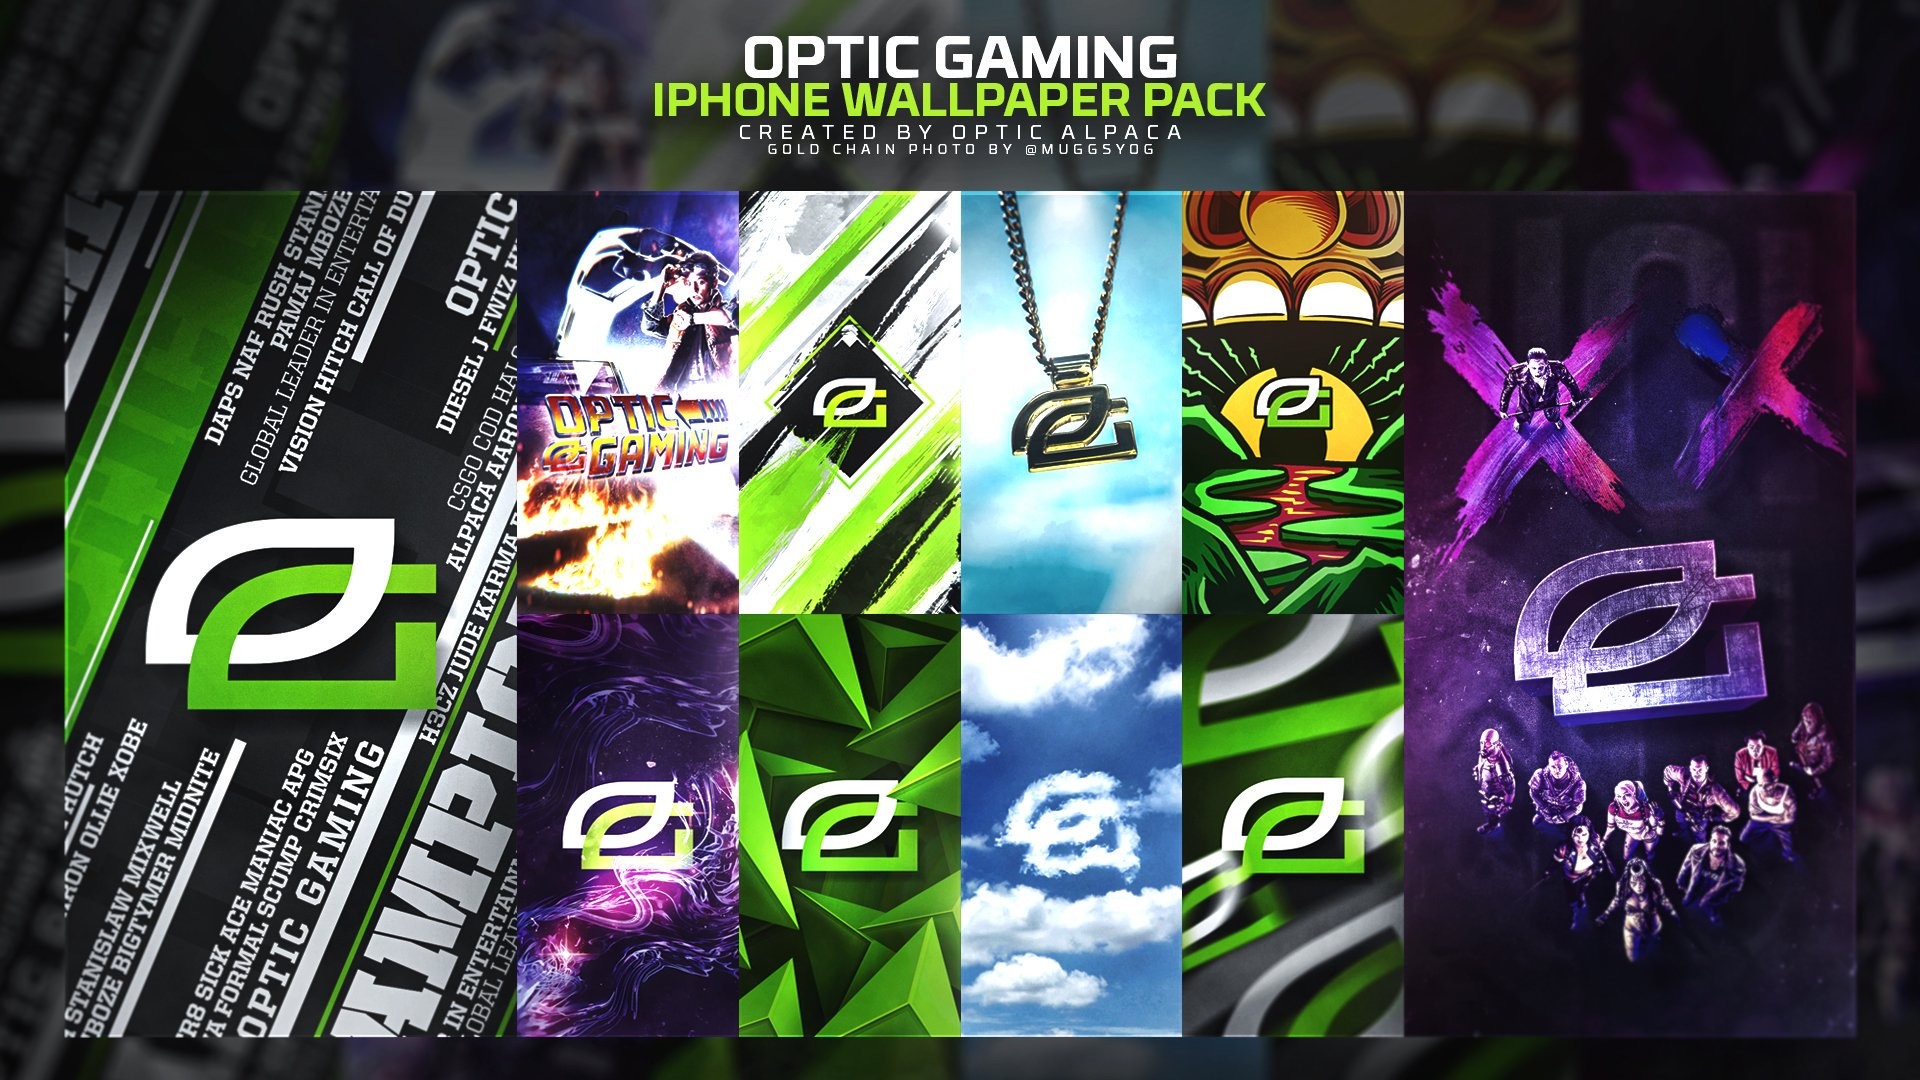 1920x1080 OpTic Alpaca on Twitter: "OpTic Gaming iPhone Wallpaper Pack! Download:  https://t.co/chZsOnrq6d Hope you enjoy, worked really hard on these! ...